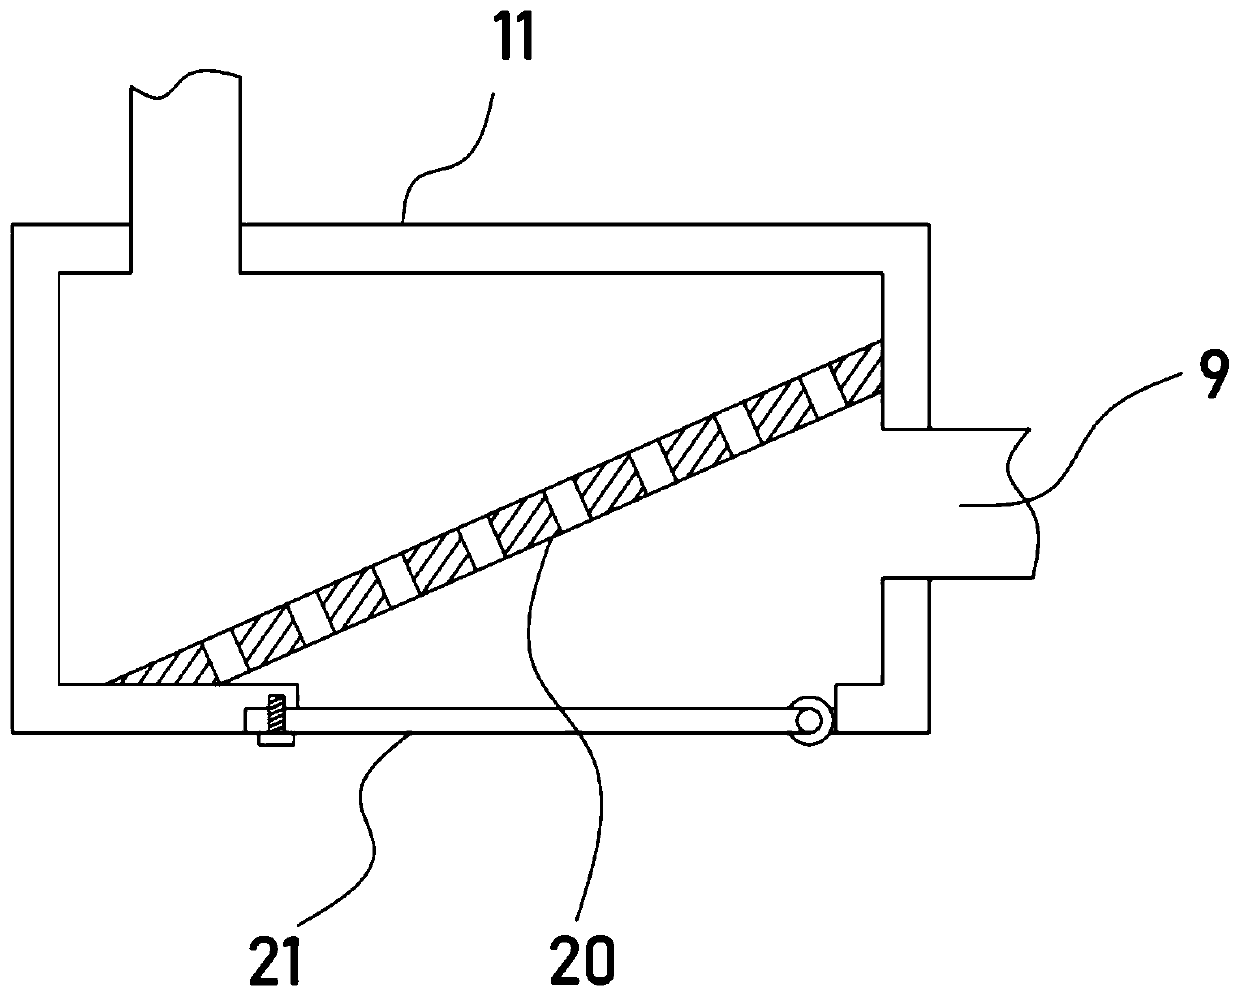 Grinding rust-removal device for processing surfaces of steel bars